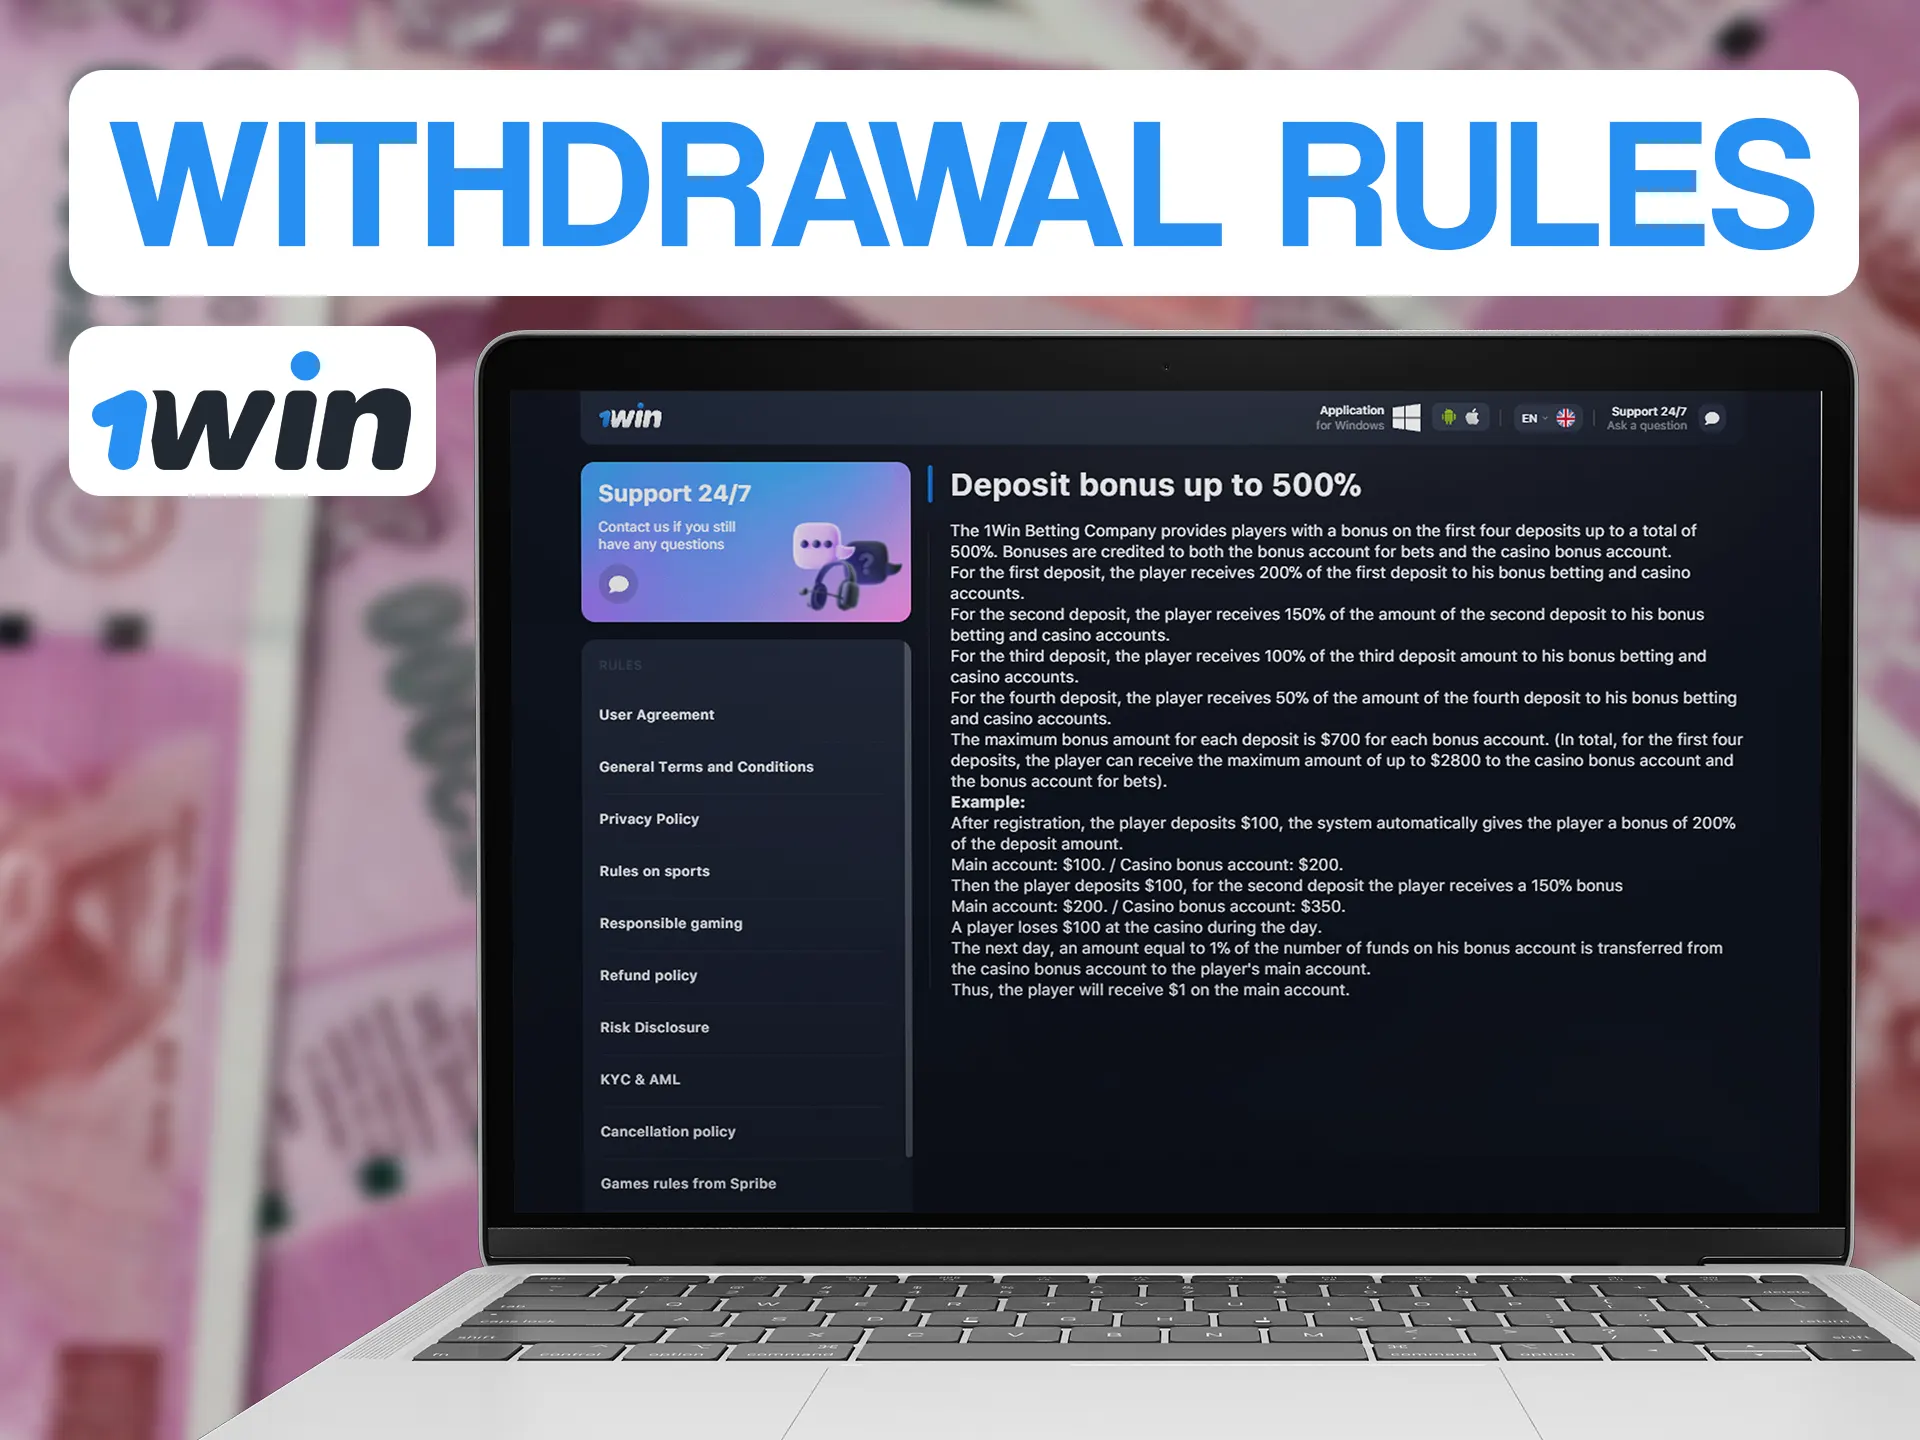 You need to know more before withdrawing money from 1win.